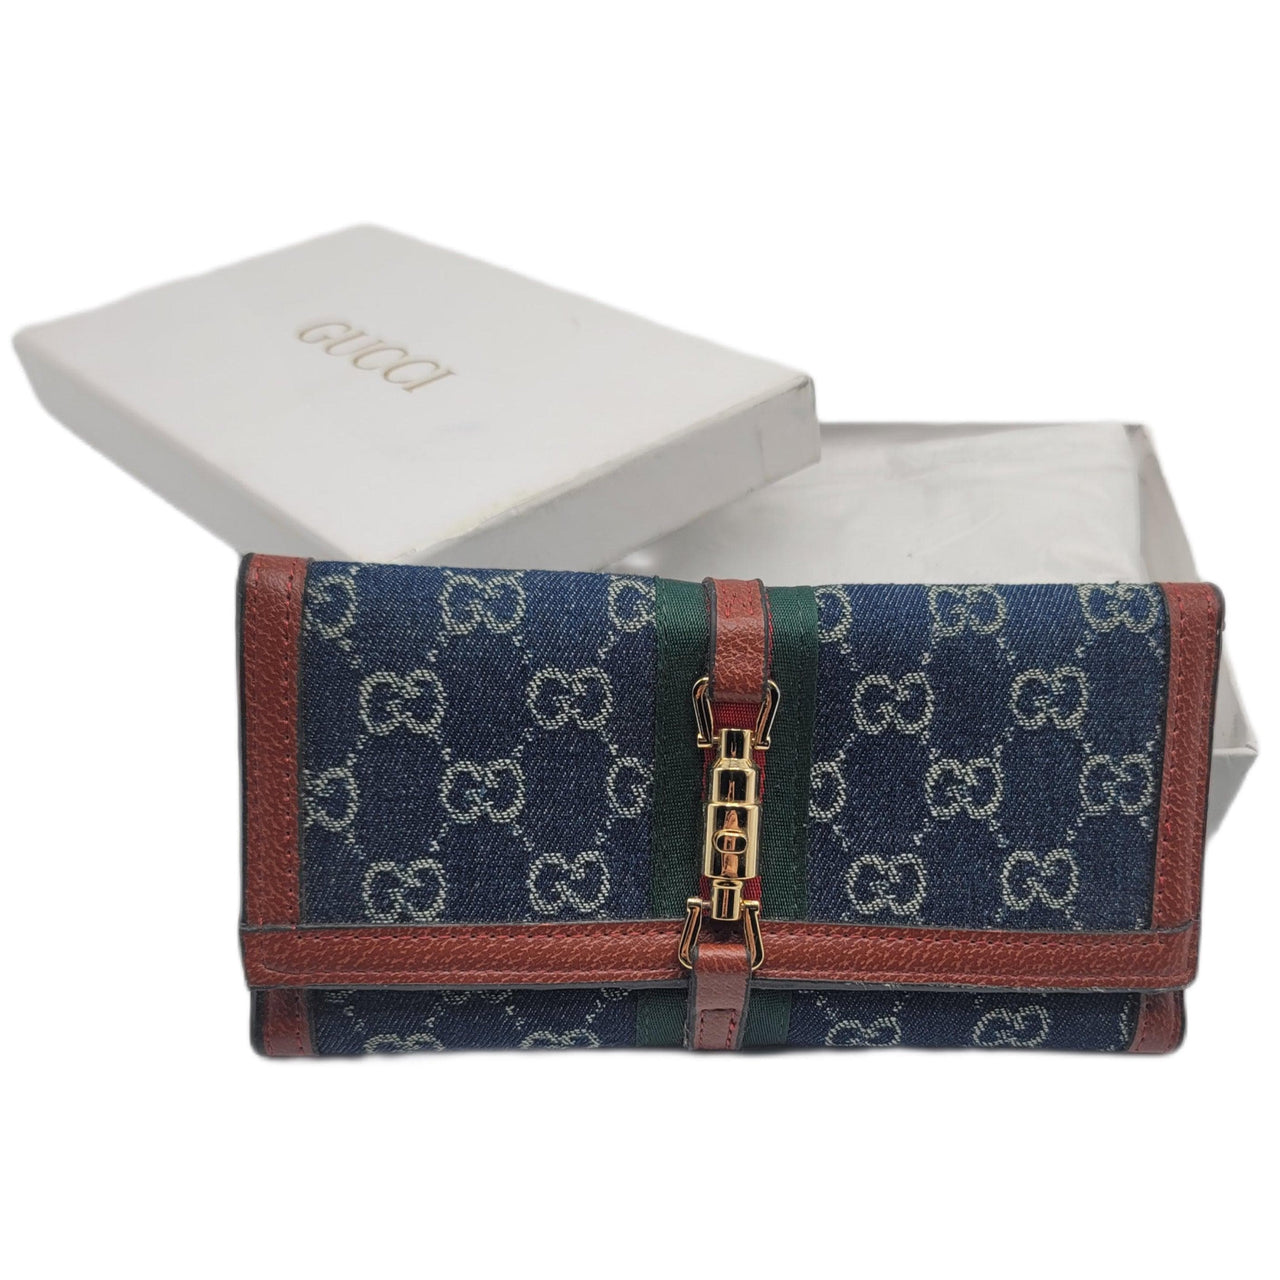 The Bag Couture Luggage & Bags Gucci 3 Fold Wallet Navy Denim